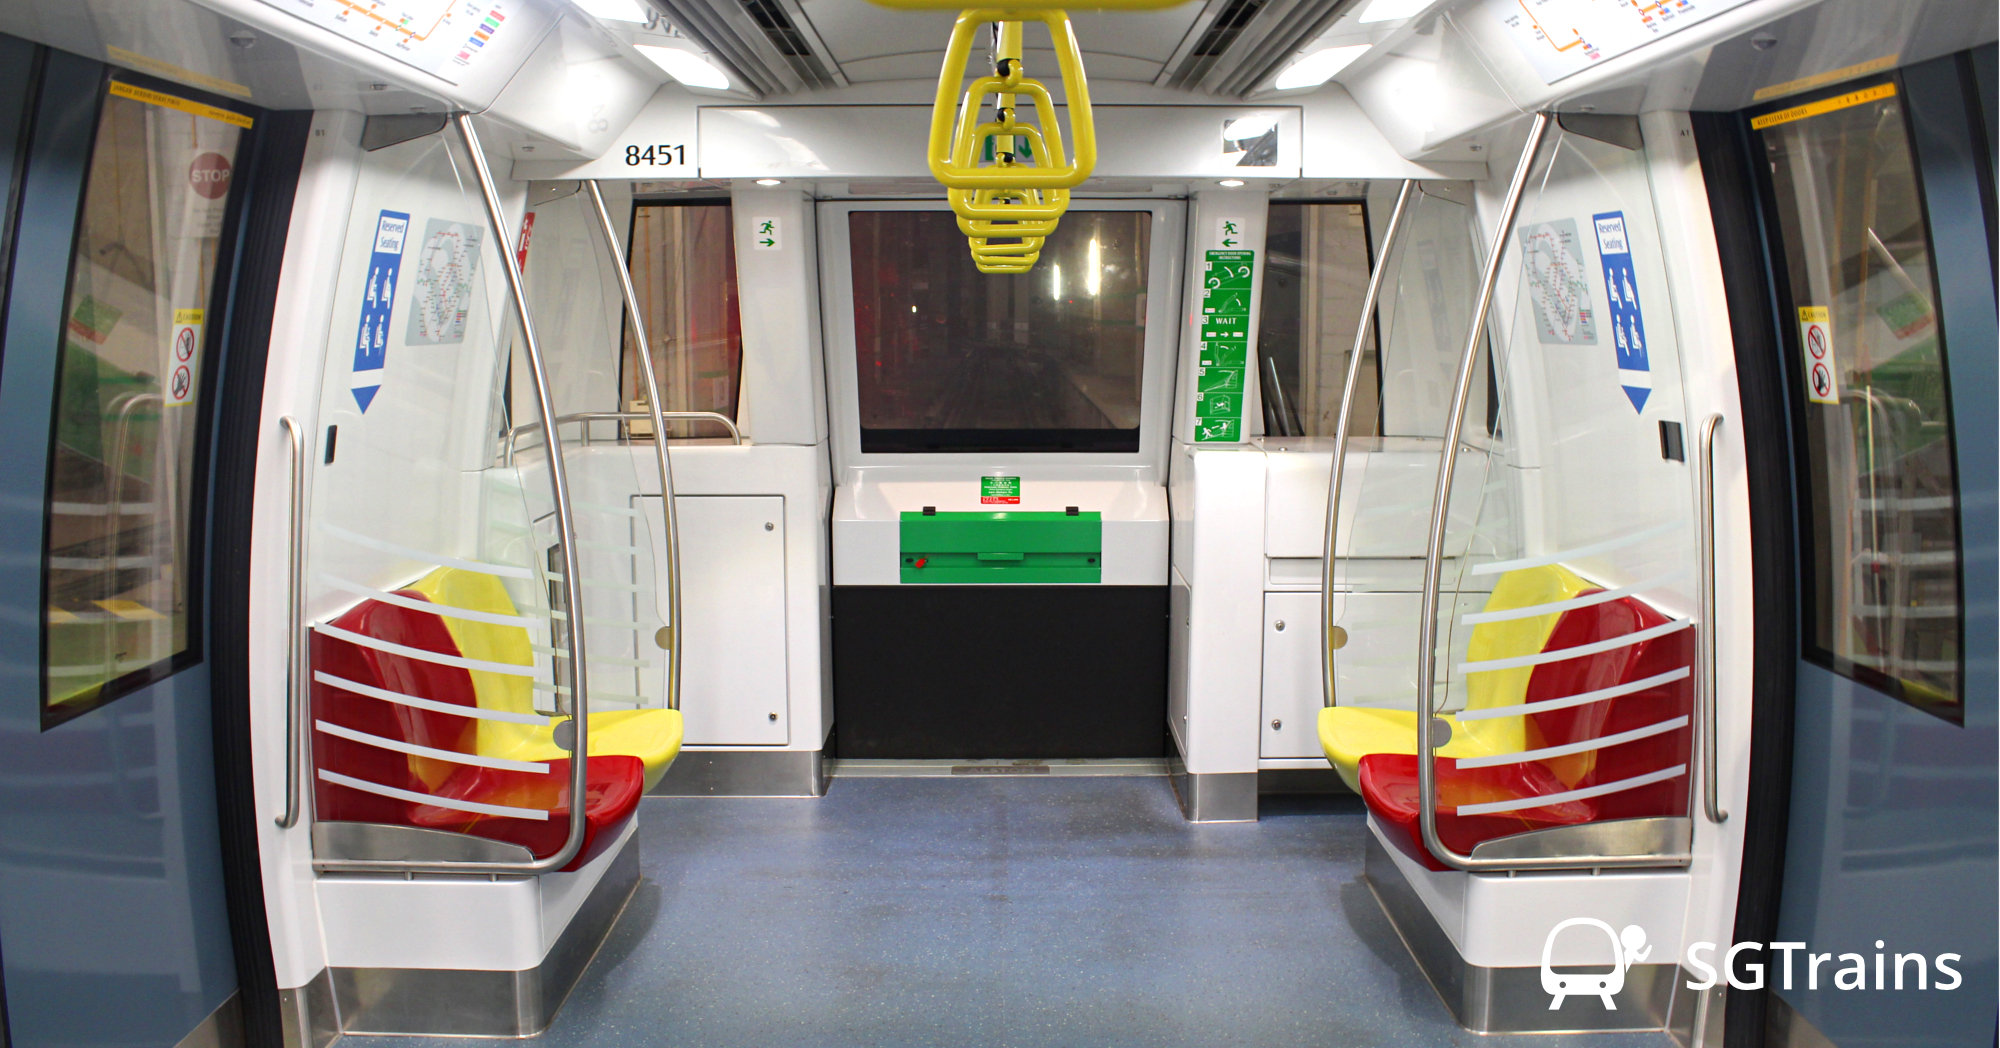 Here’s How ‘Rovers’ on Driverless MRT Trains Keep the Train Network Smoothly Operated!